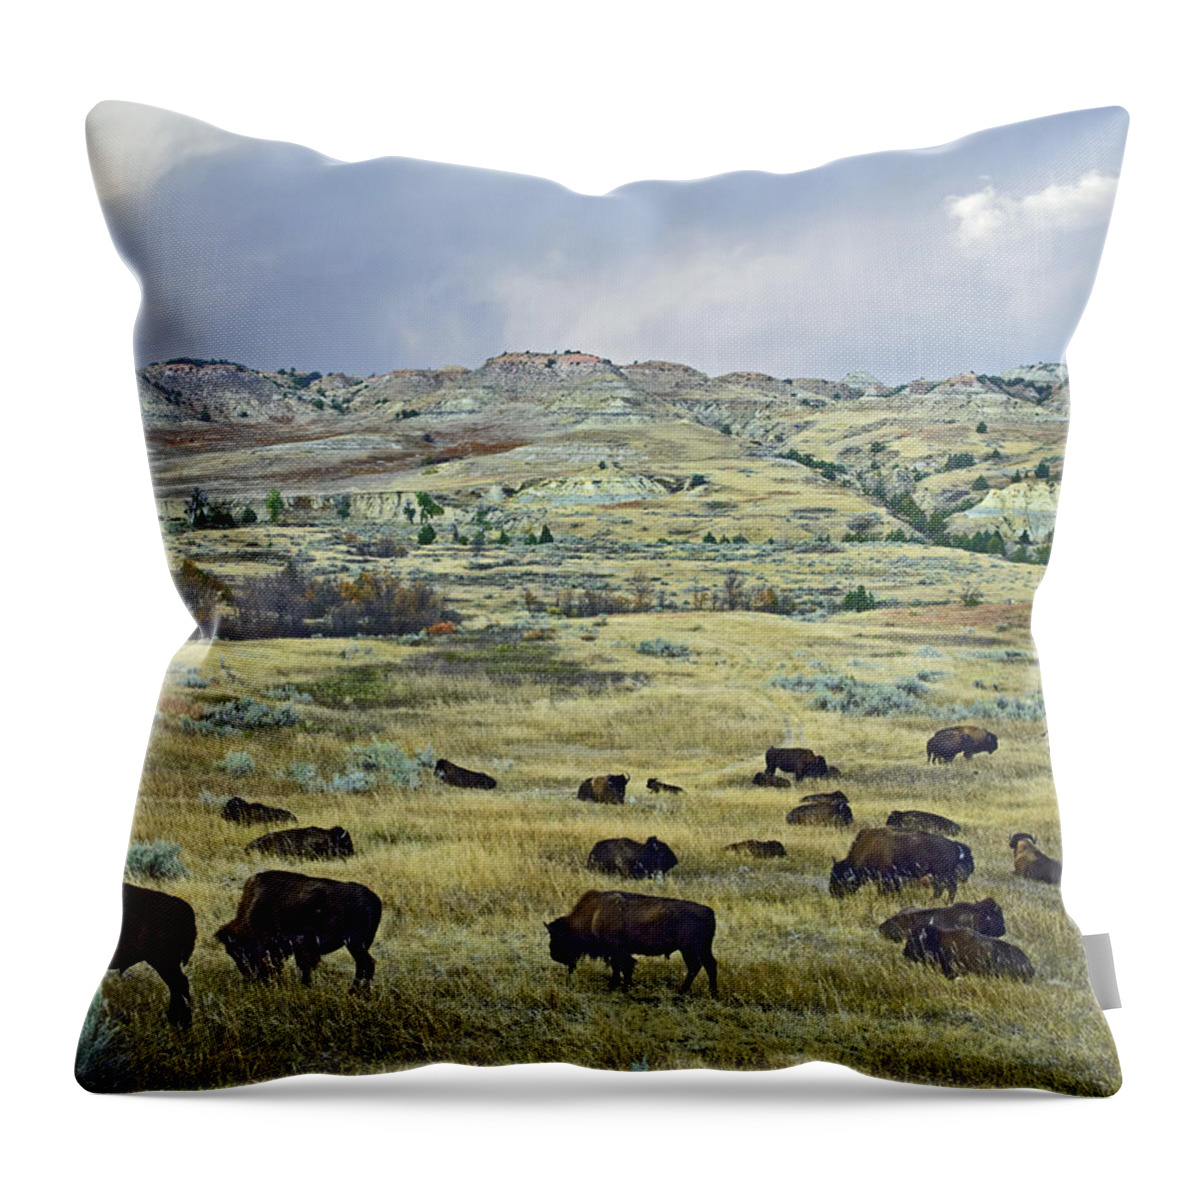 Feb0514 Throw Pillow featuring the photograph Bison Herd On Praire Theodore Roosevelt by Tim Fitzharris